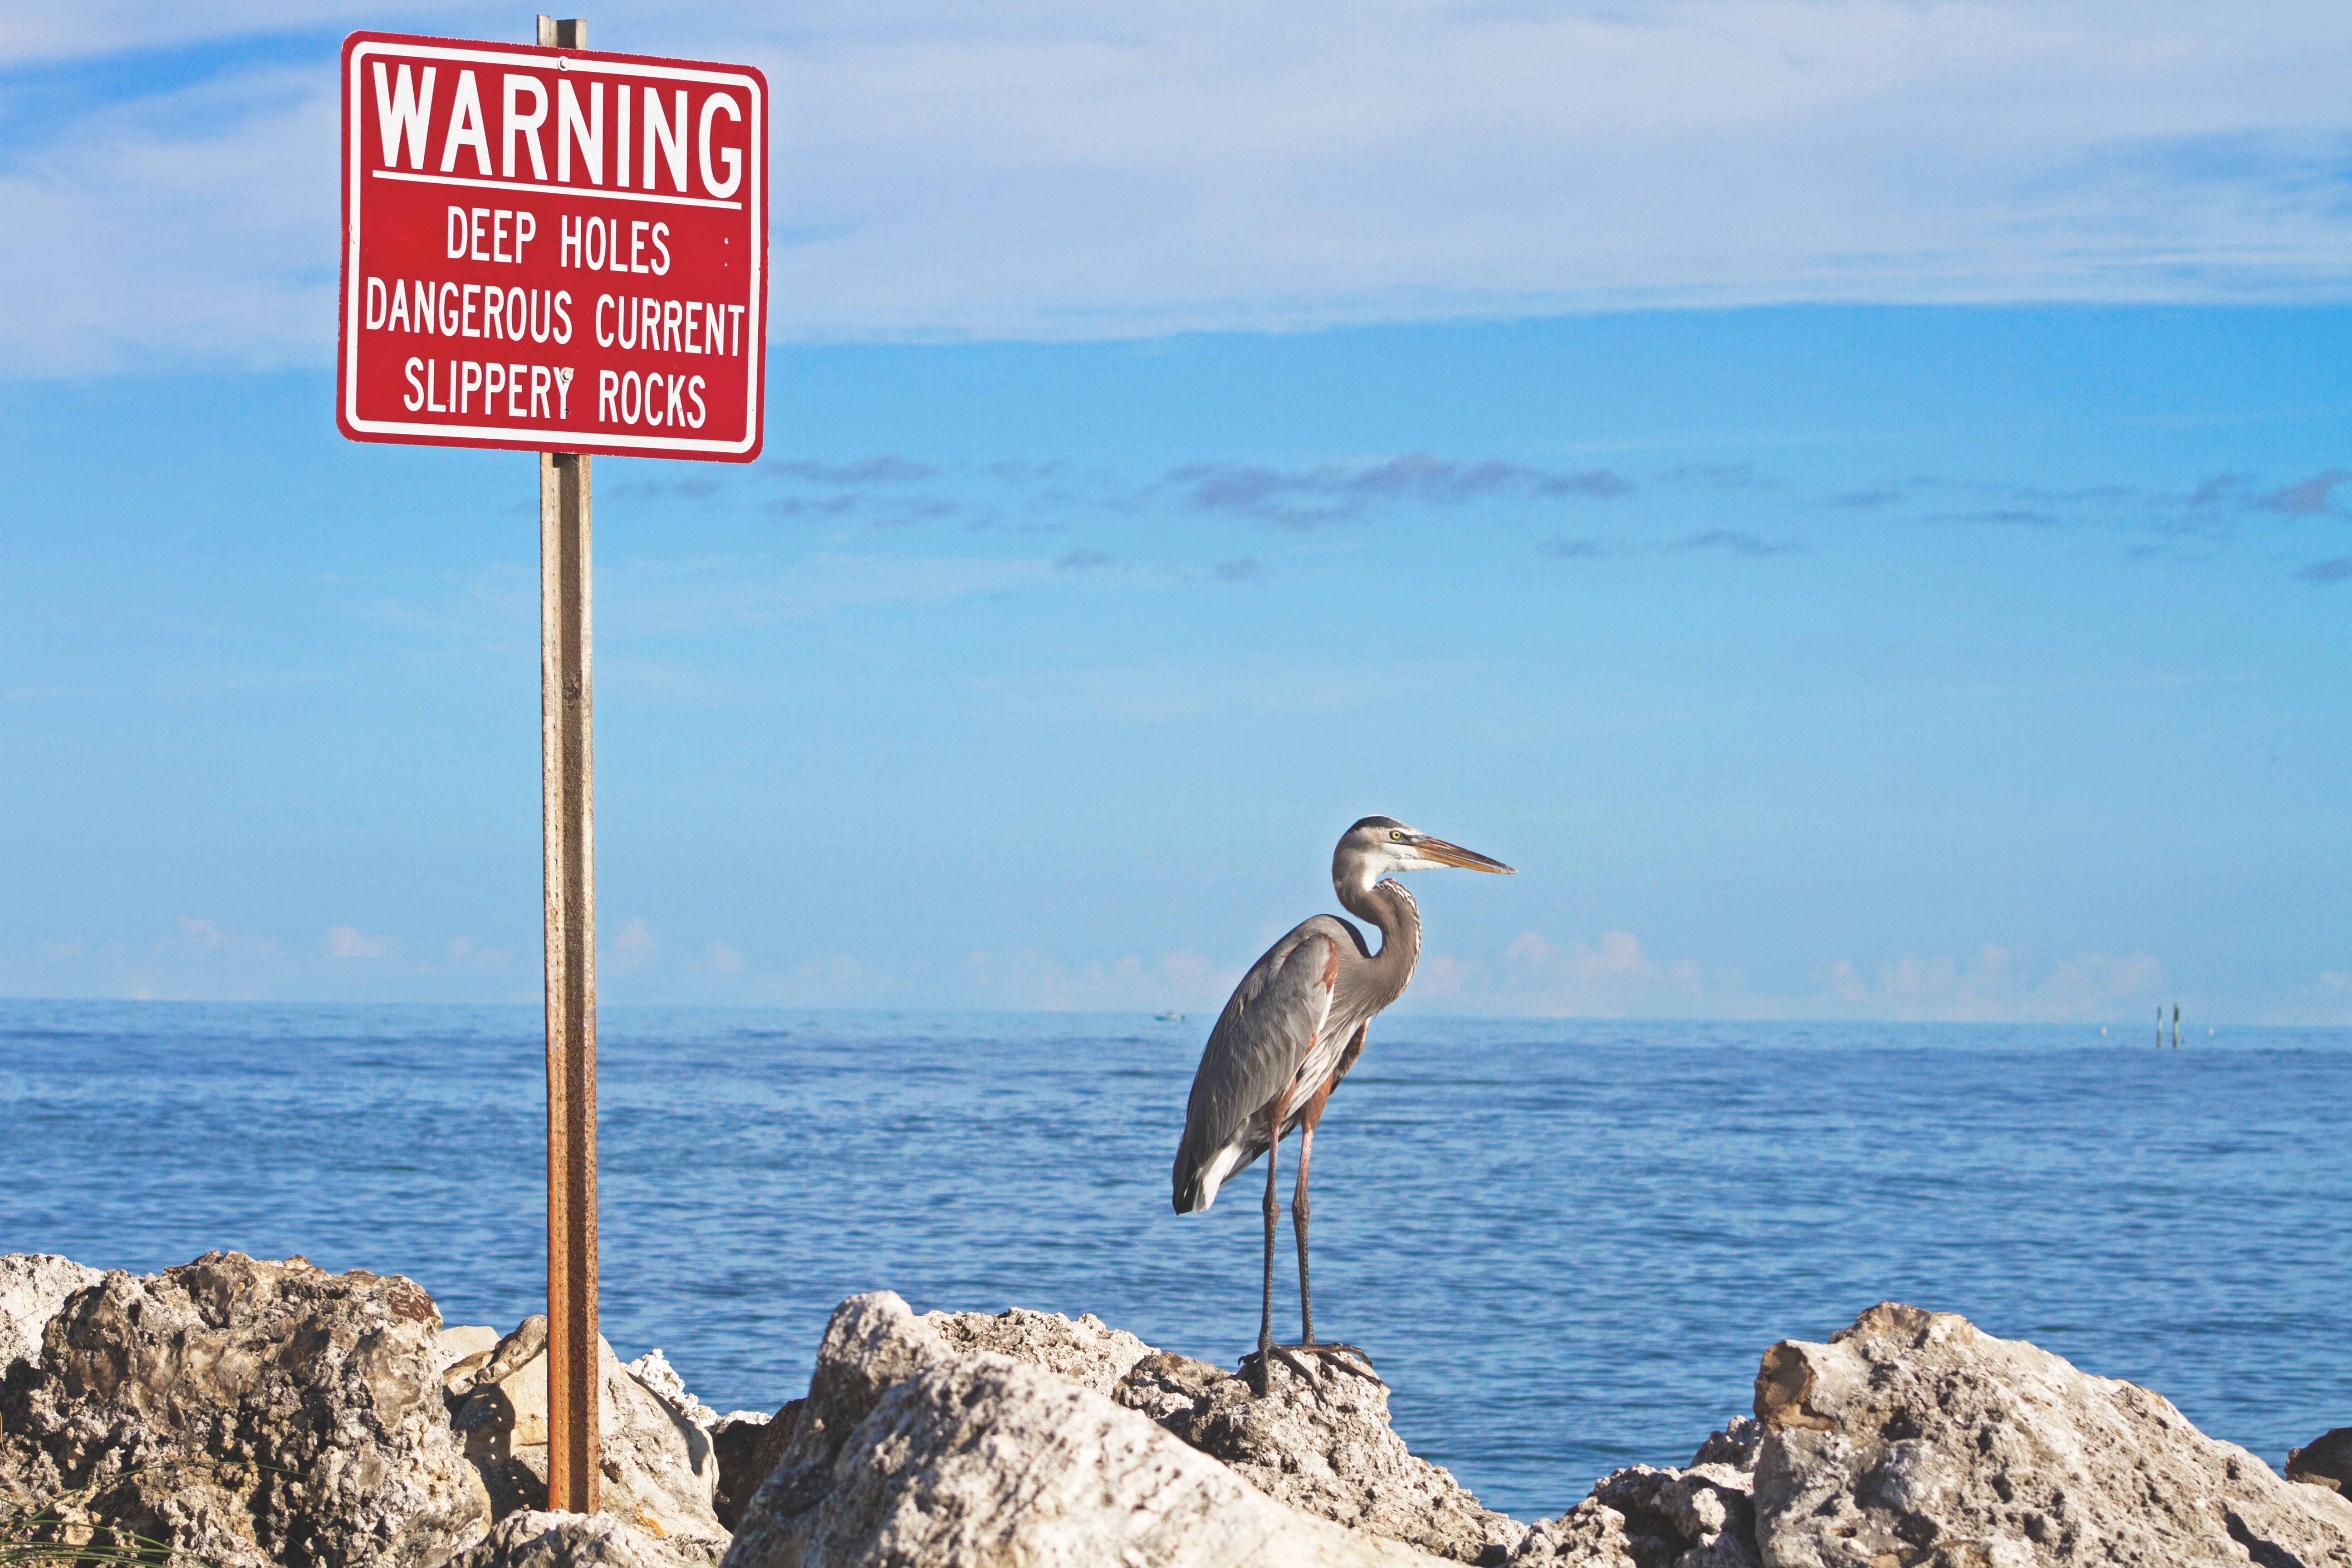 Florida biodiversity suffering from climate change consequences.